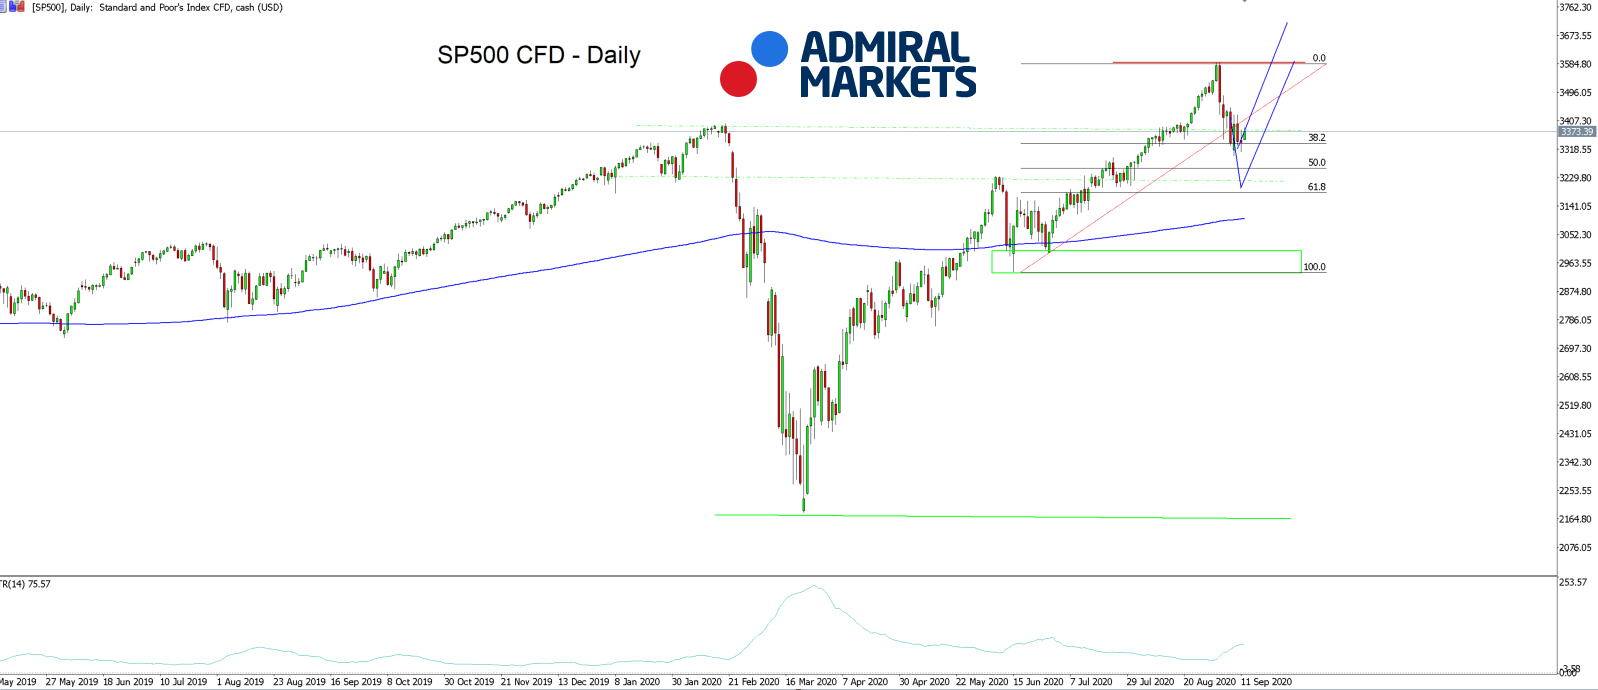 SP500 CFD Daily chart